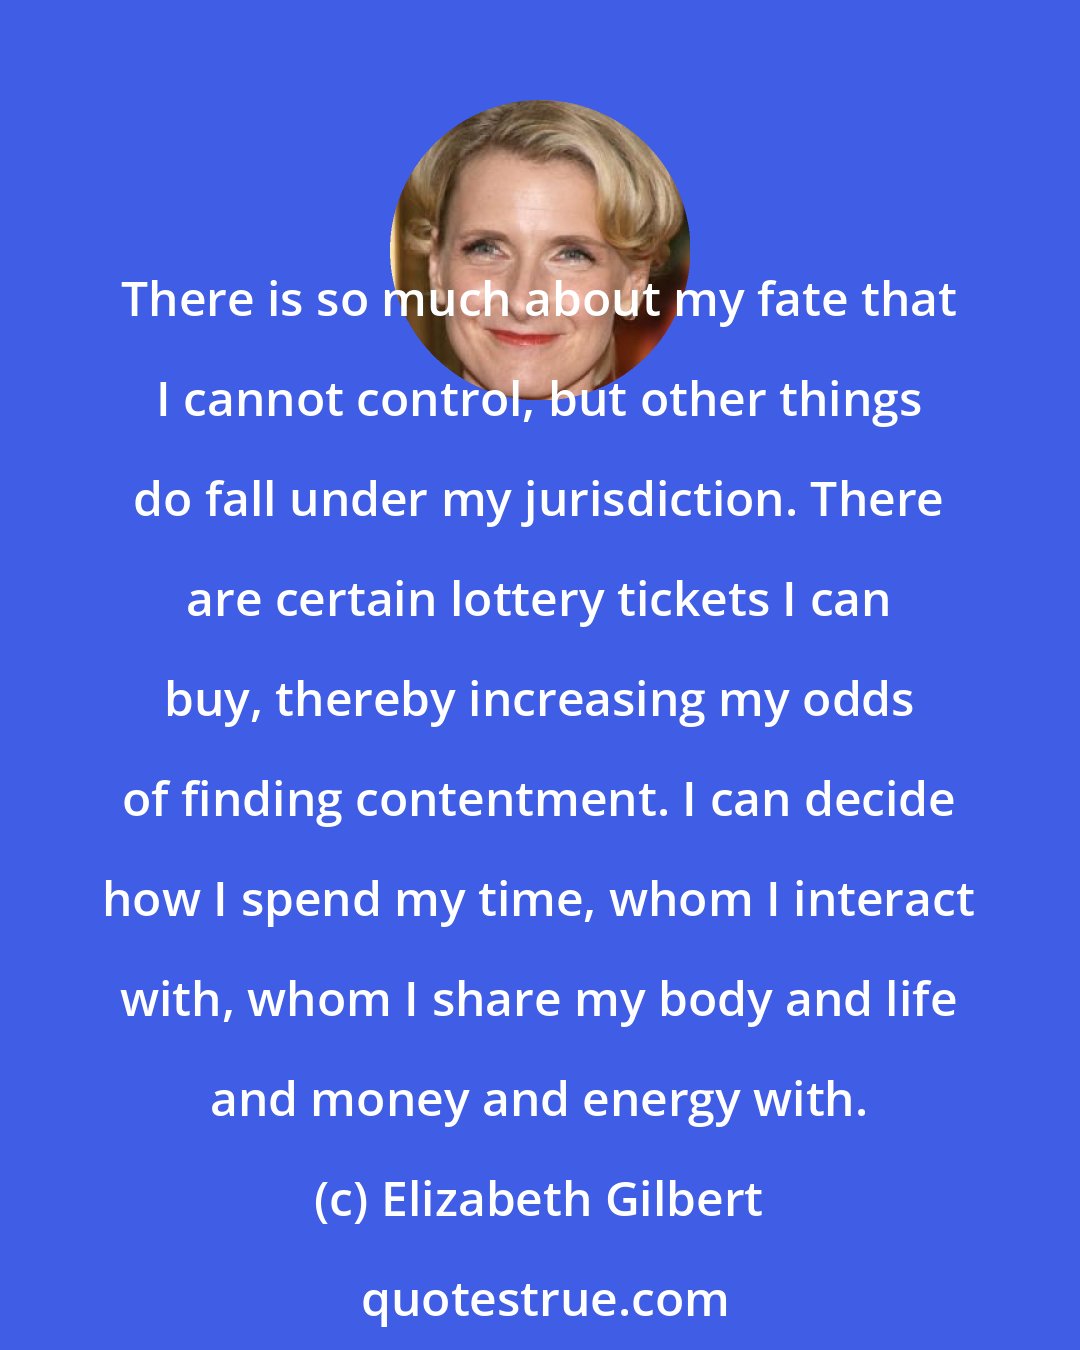 Elizabeth Gilbert: There is so much about my fate that I cannot control, but other things do fall under my jurisdiction. There are certain lottery tickets I can buy, thereby increasing my odds of finding contentment. I can decide how I spend my time, whom I interact with, whom I share my body and life and money and energy with.